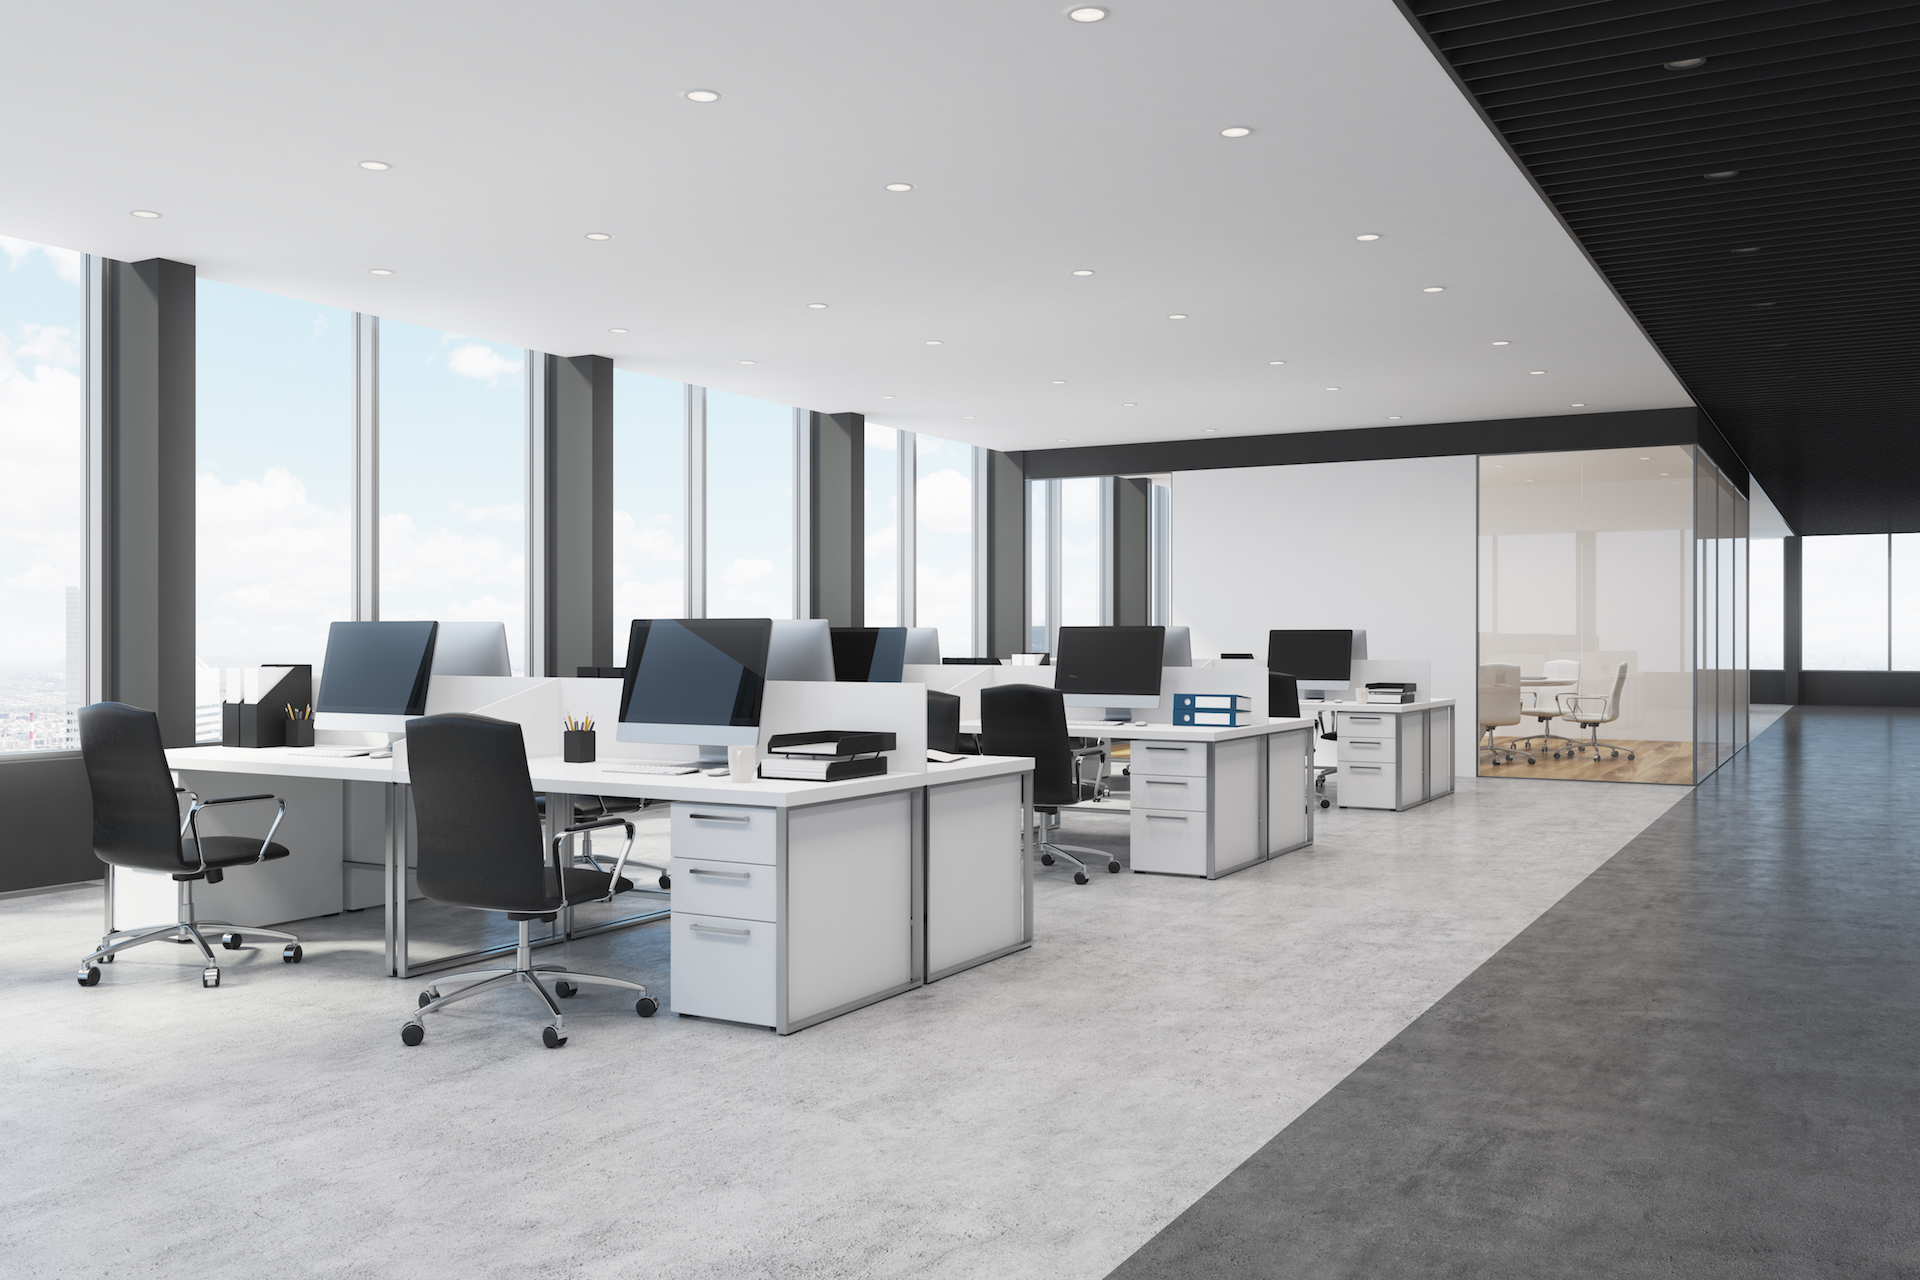   We develop thoughtful office furniture.      Work with us  